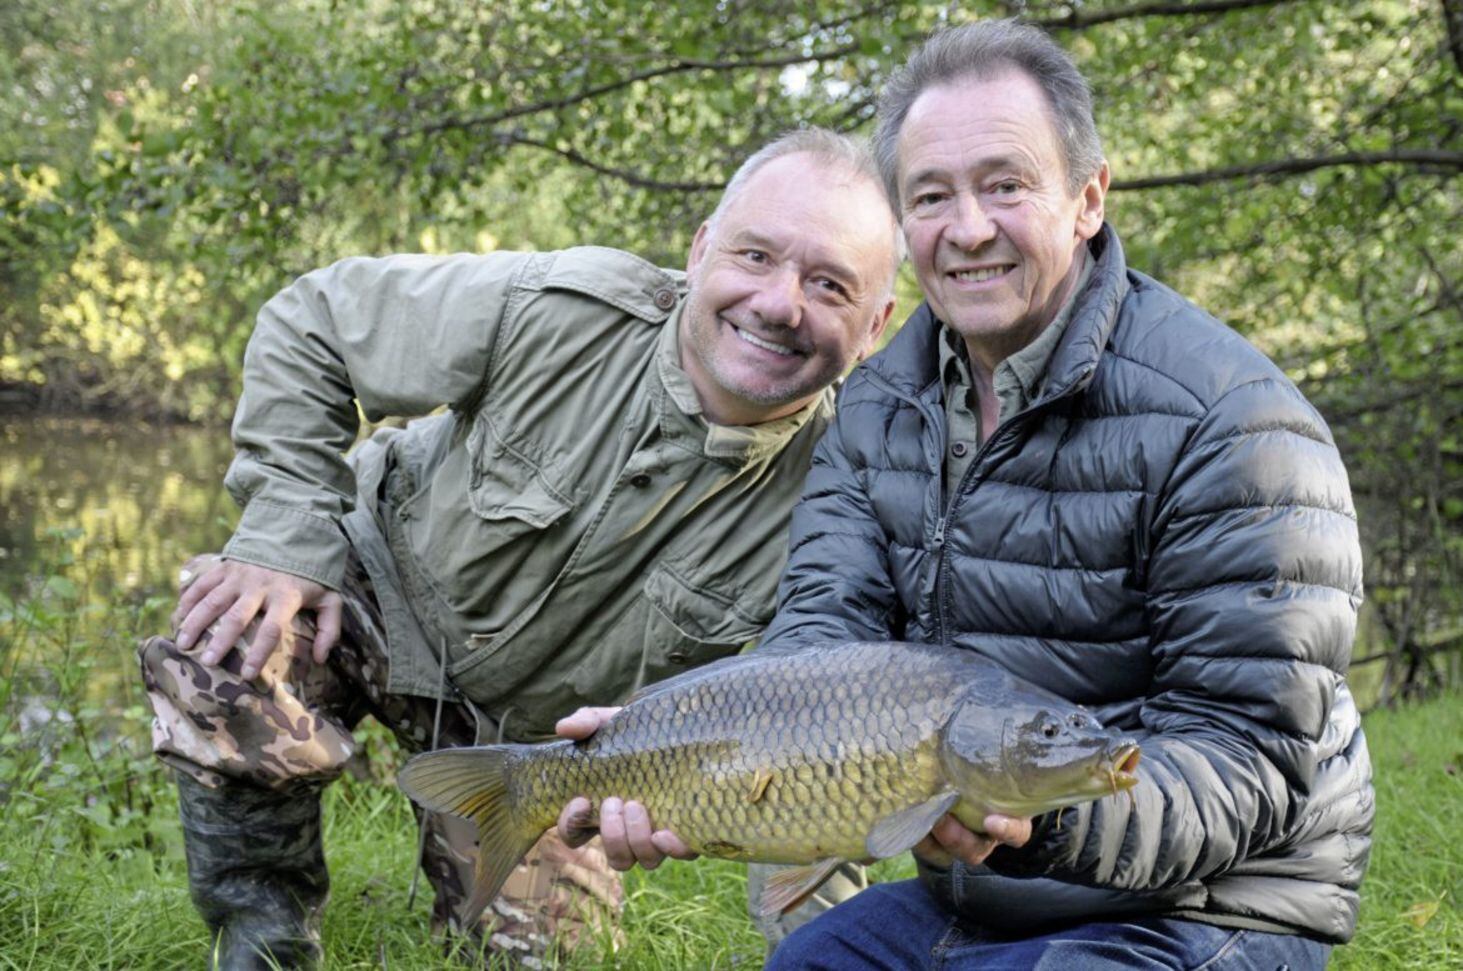 Bob Mortimer and Paul Whitehouse on fishing and heart surgery